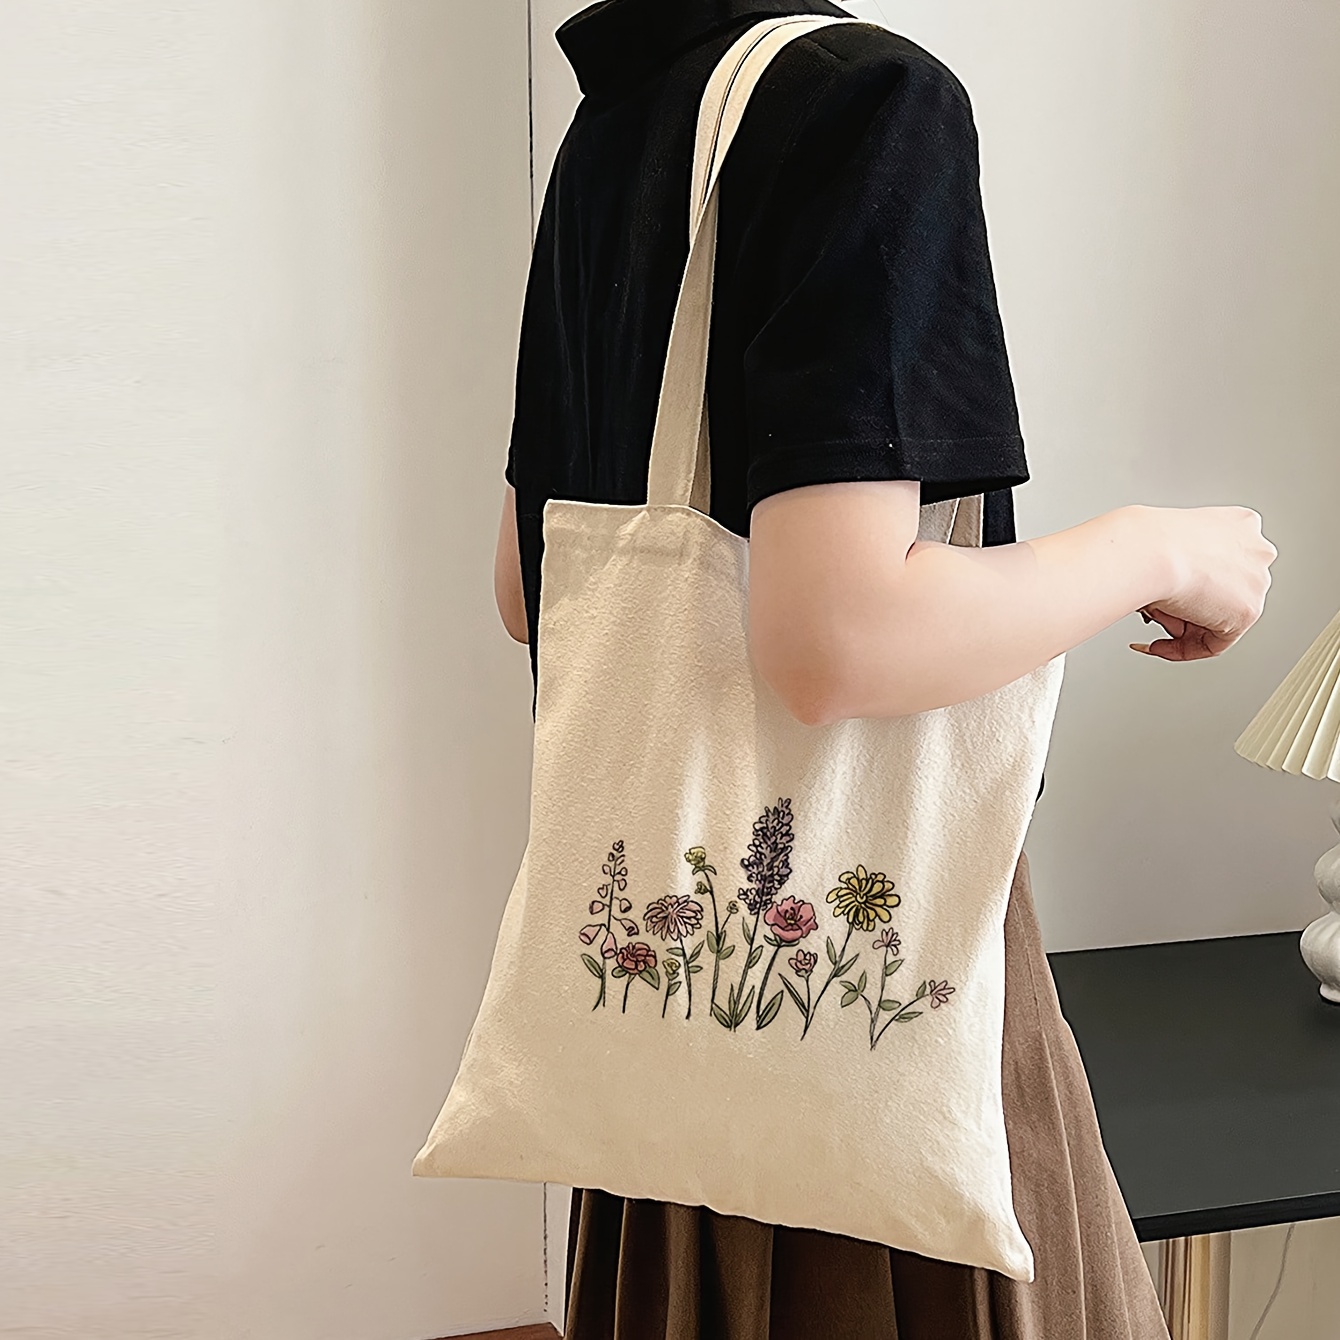 

Floral Tote Bag For Women, Canvas Shoulder Bag With 9 Delicate Flowers Design, Fashionable And Convenient For Shopping And Travel Storage